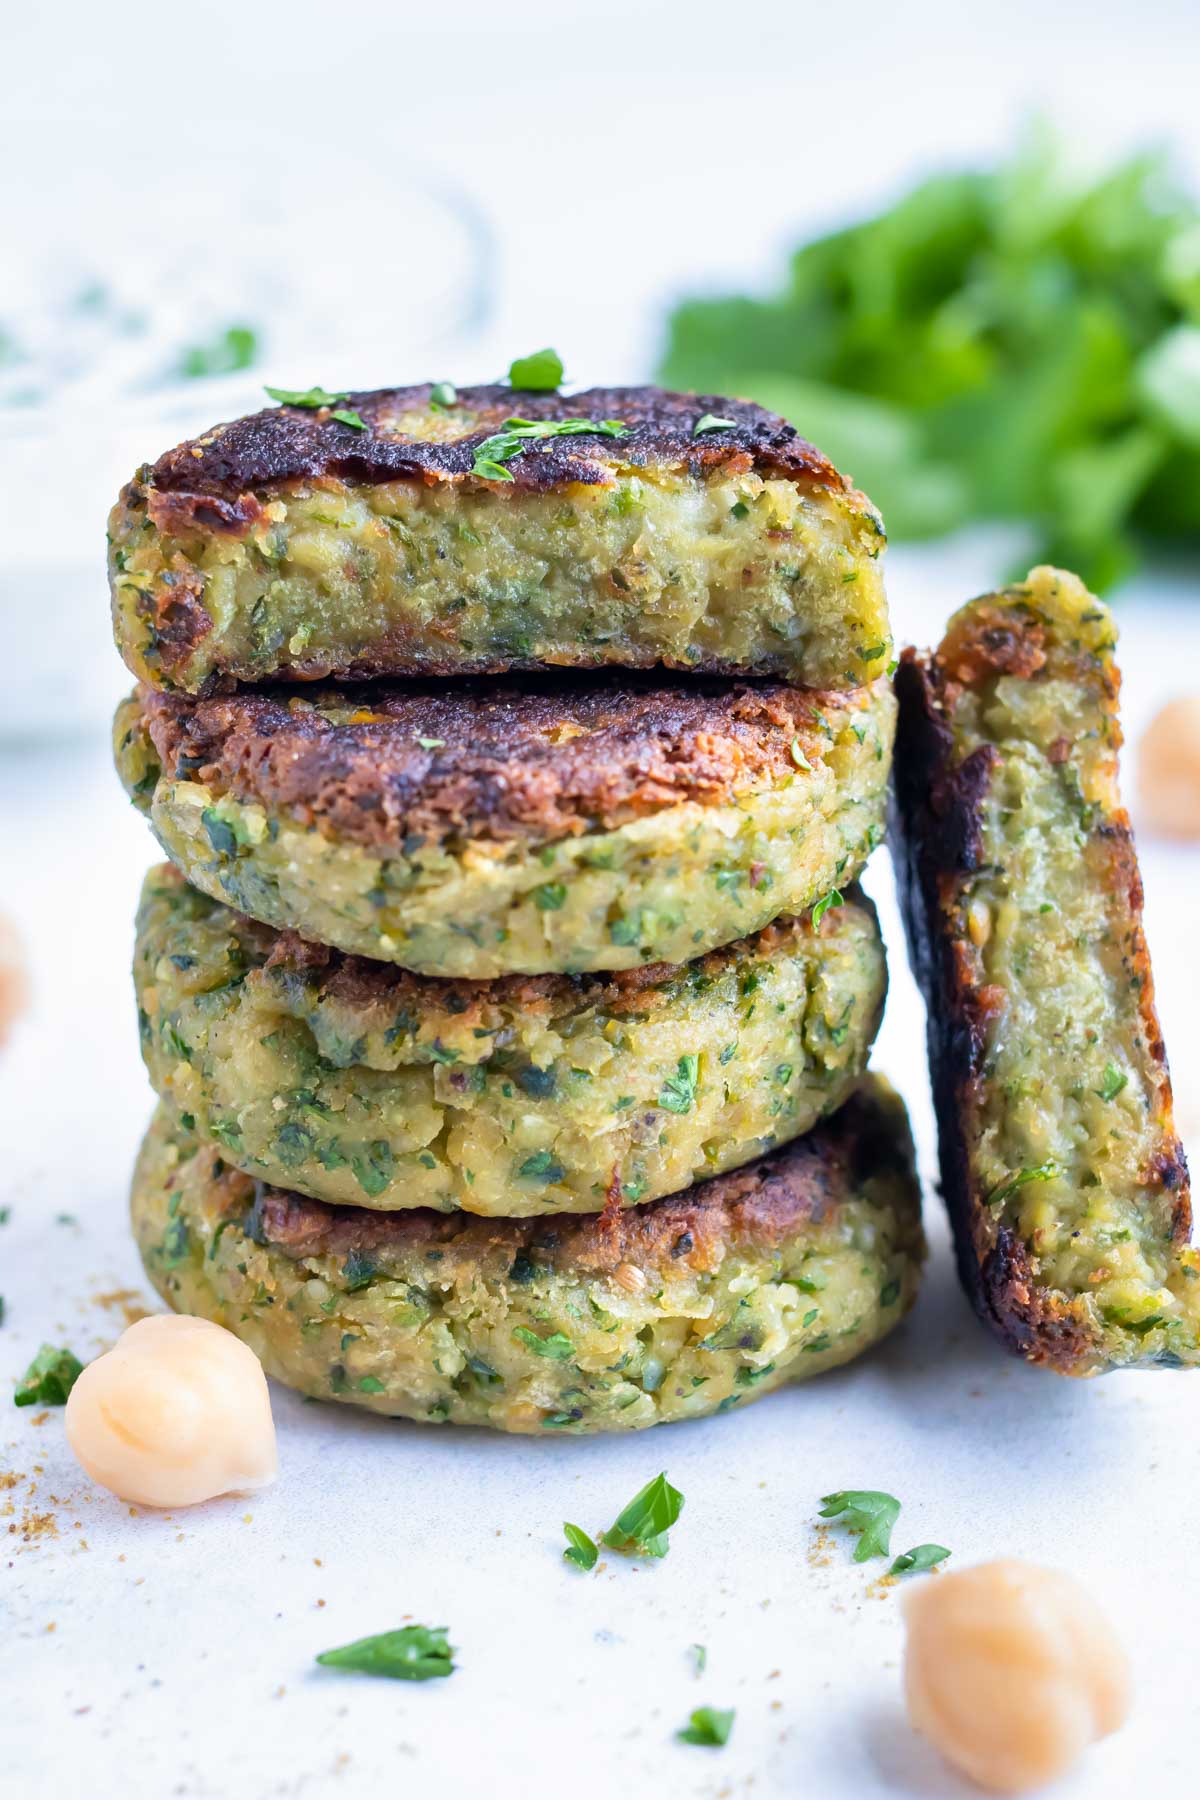 Falafel is an easy Mediterranean dish that is stacked on the counter.